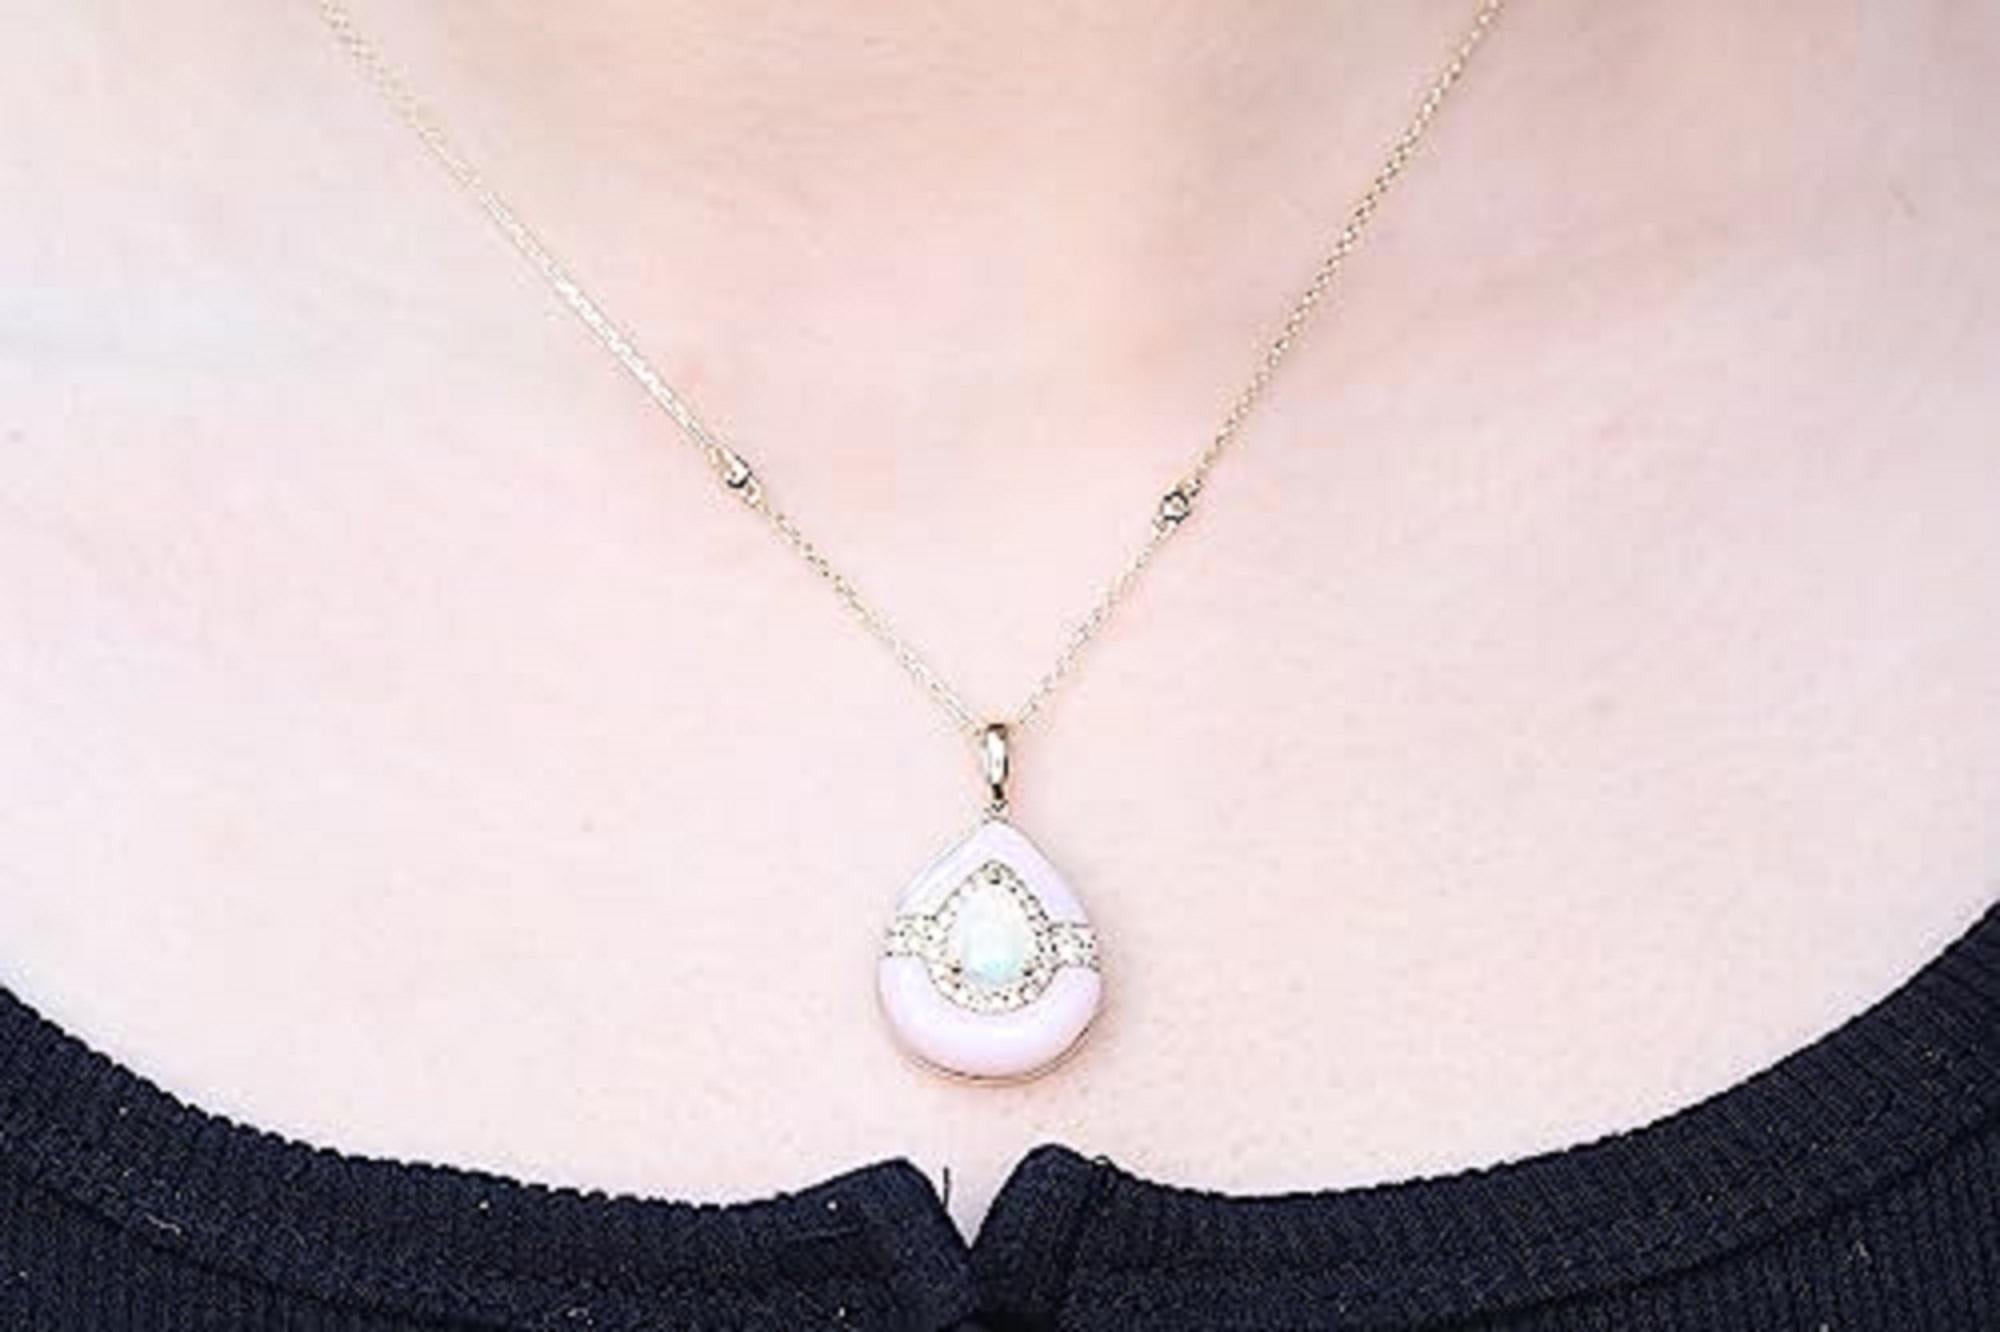 Decorate yourself in elegance with this Pendant is crafted from 14-karat Yellow Gold by Gin & Grace. This Pendant is made up of 7*9 Pear-cut Ethiopian Opal (1 pcs) 0.96 carat, Pink Opal free mix (2 Pcs) 3.86 carat and round-cut White Diamond (35